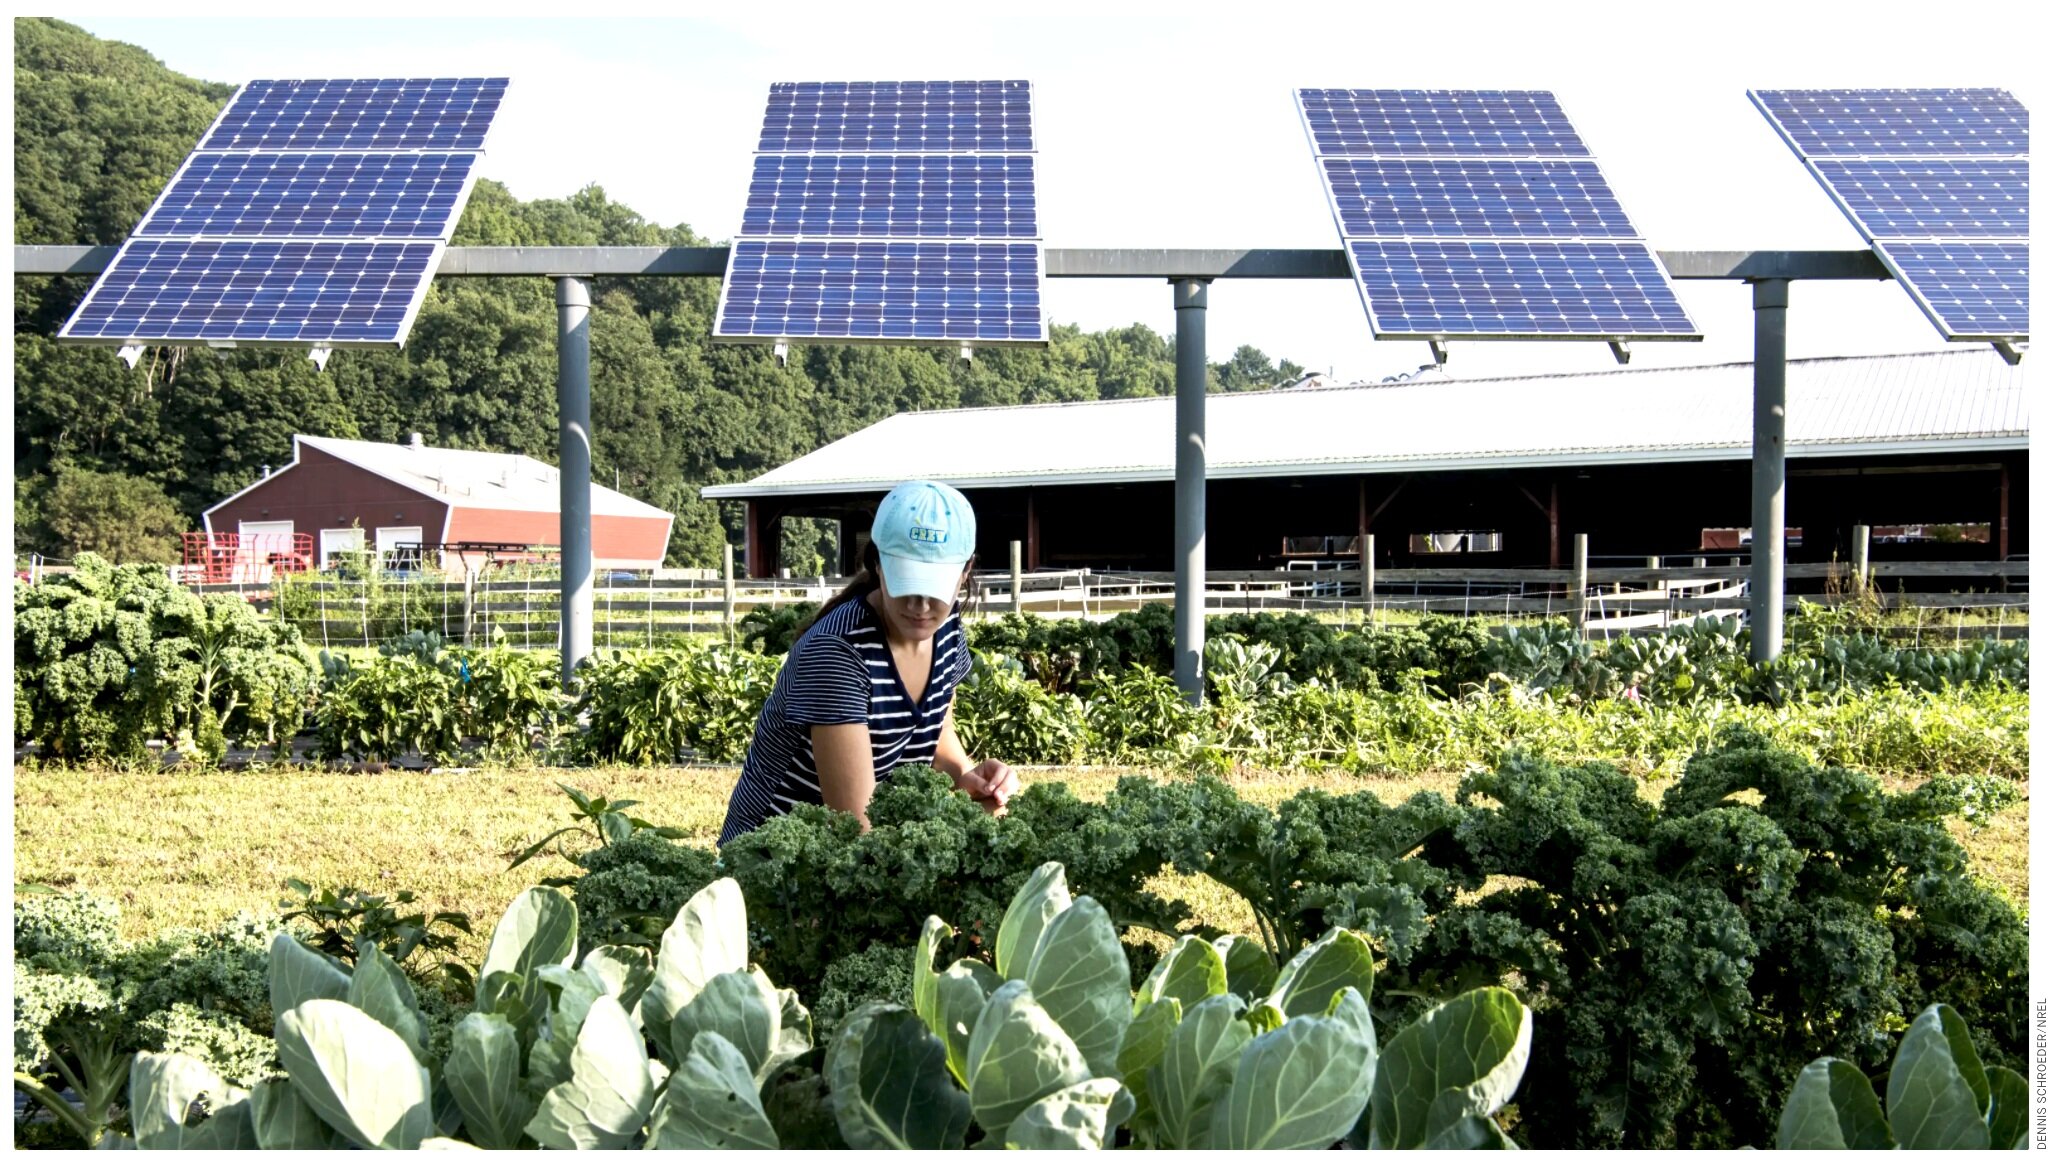 Agro-voltaic crops: vegetables growing in the shade of solar panels